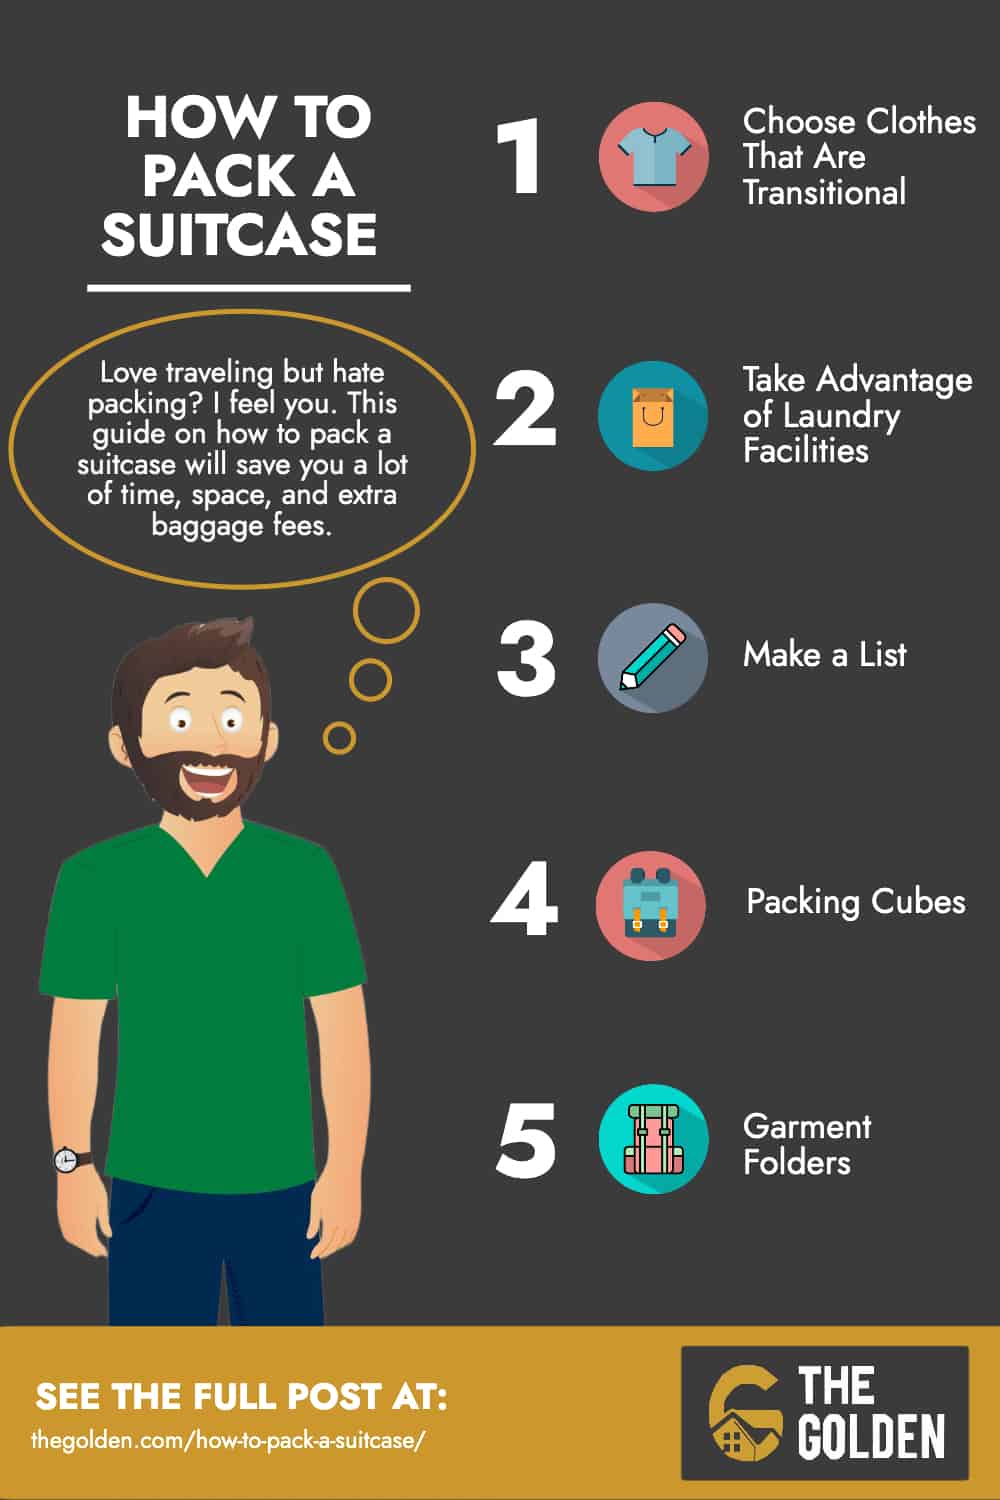 How To Pack A Suitcase - Infographic